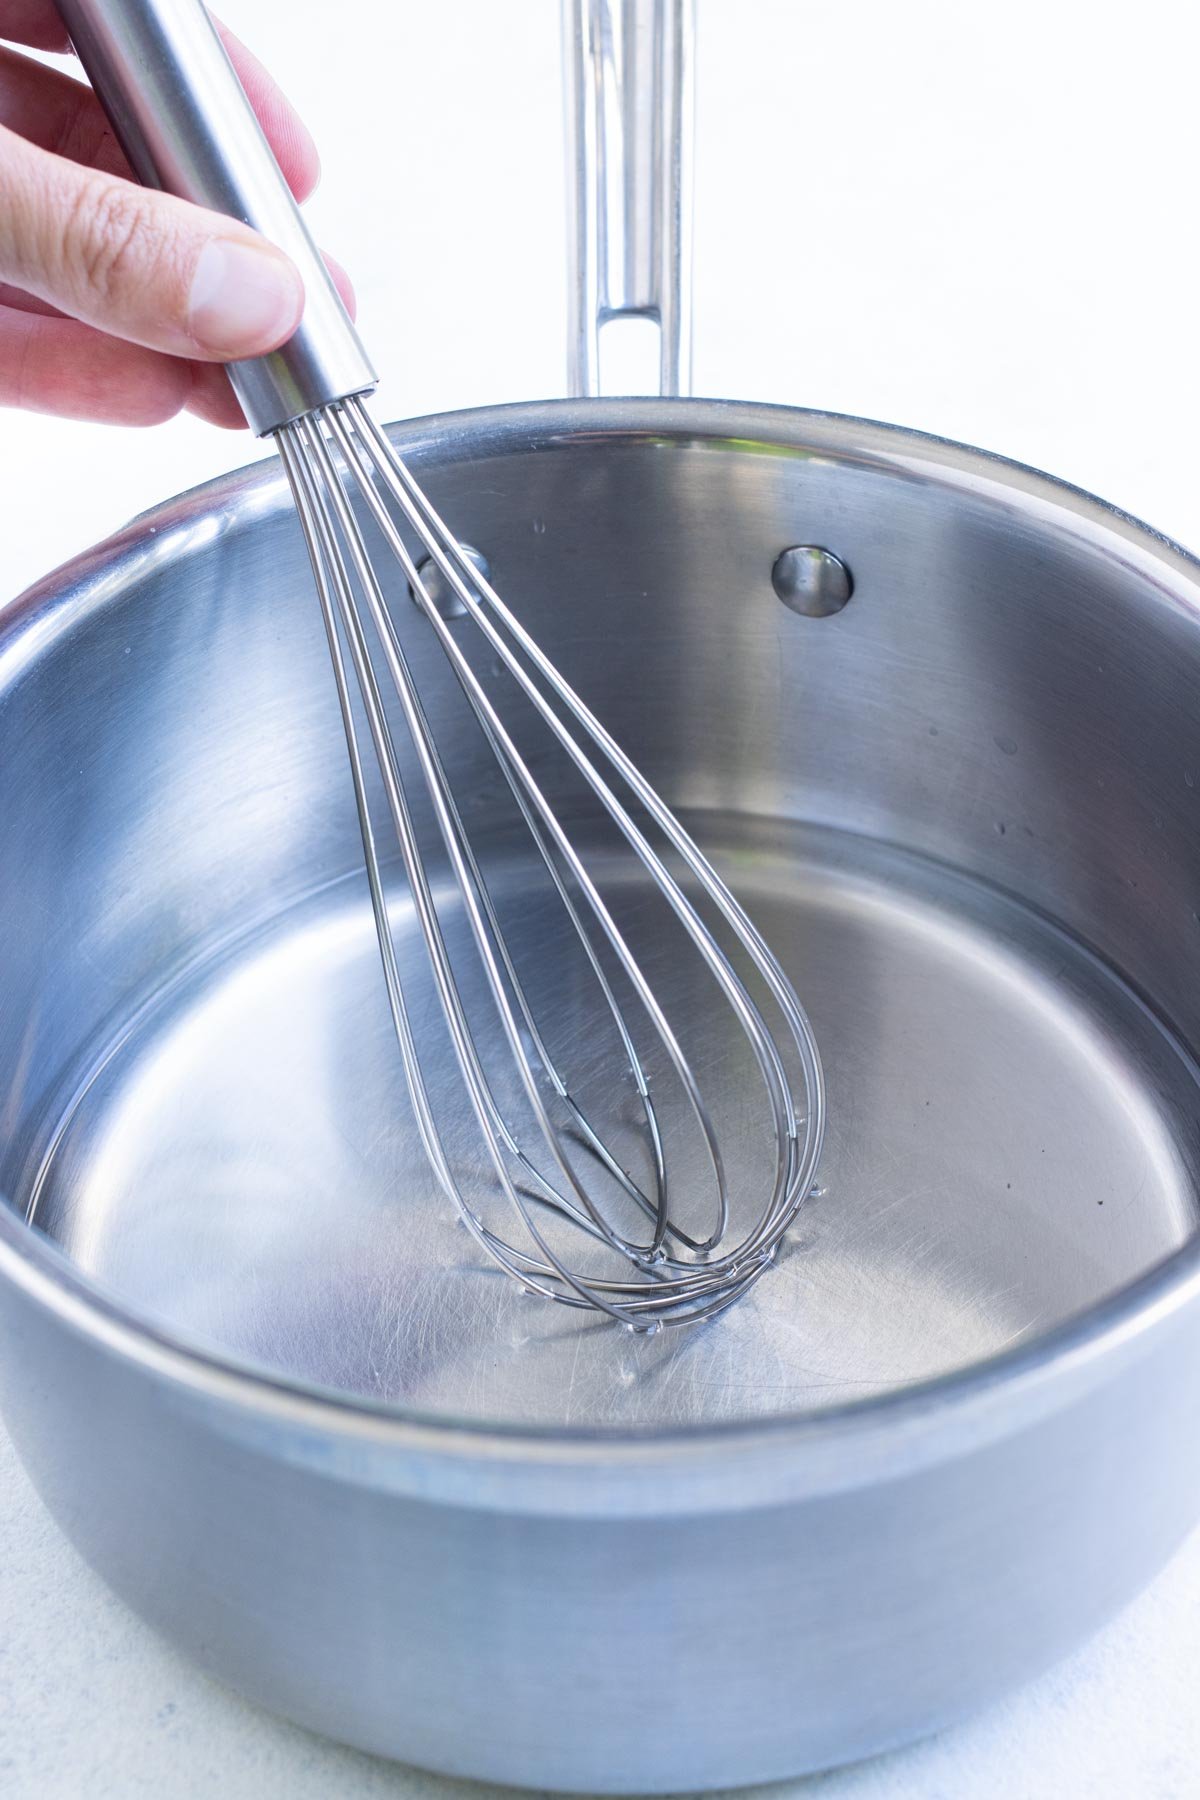 A whisk stirs brining solution in a saucepan.